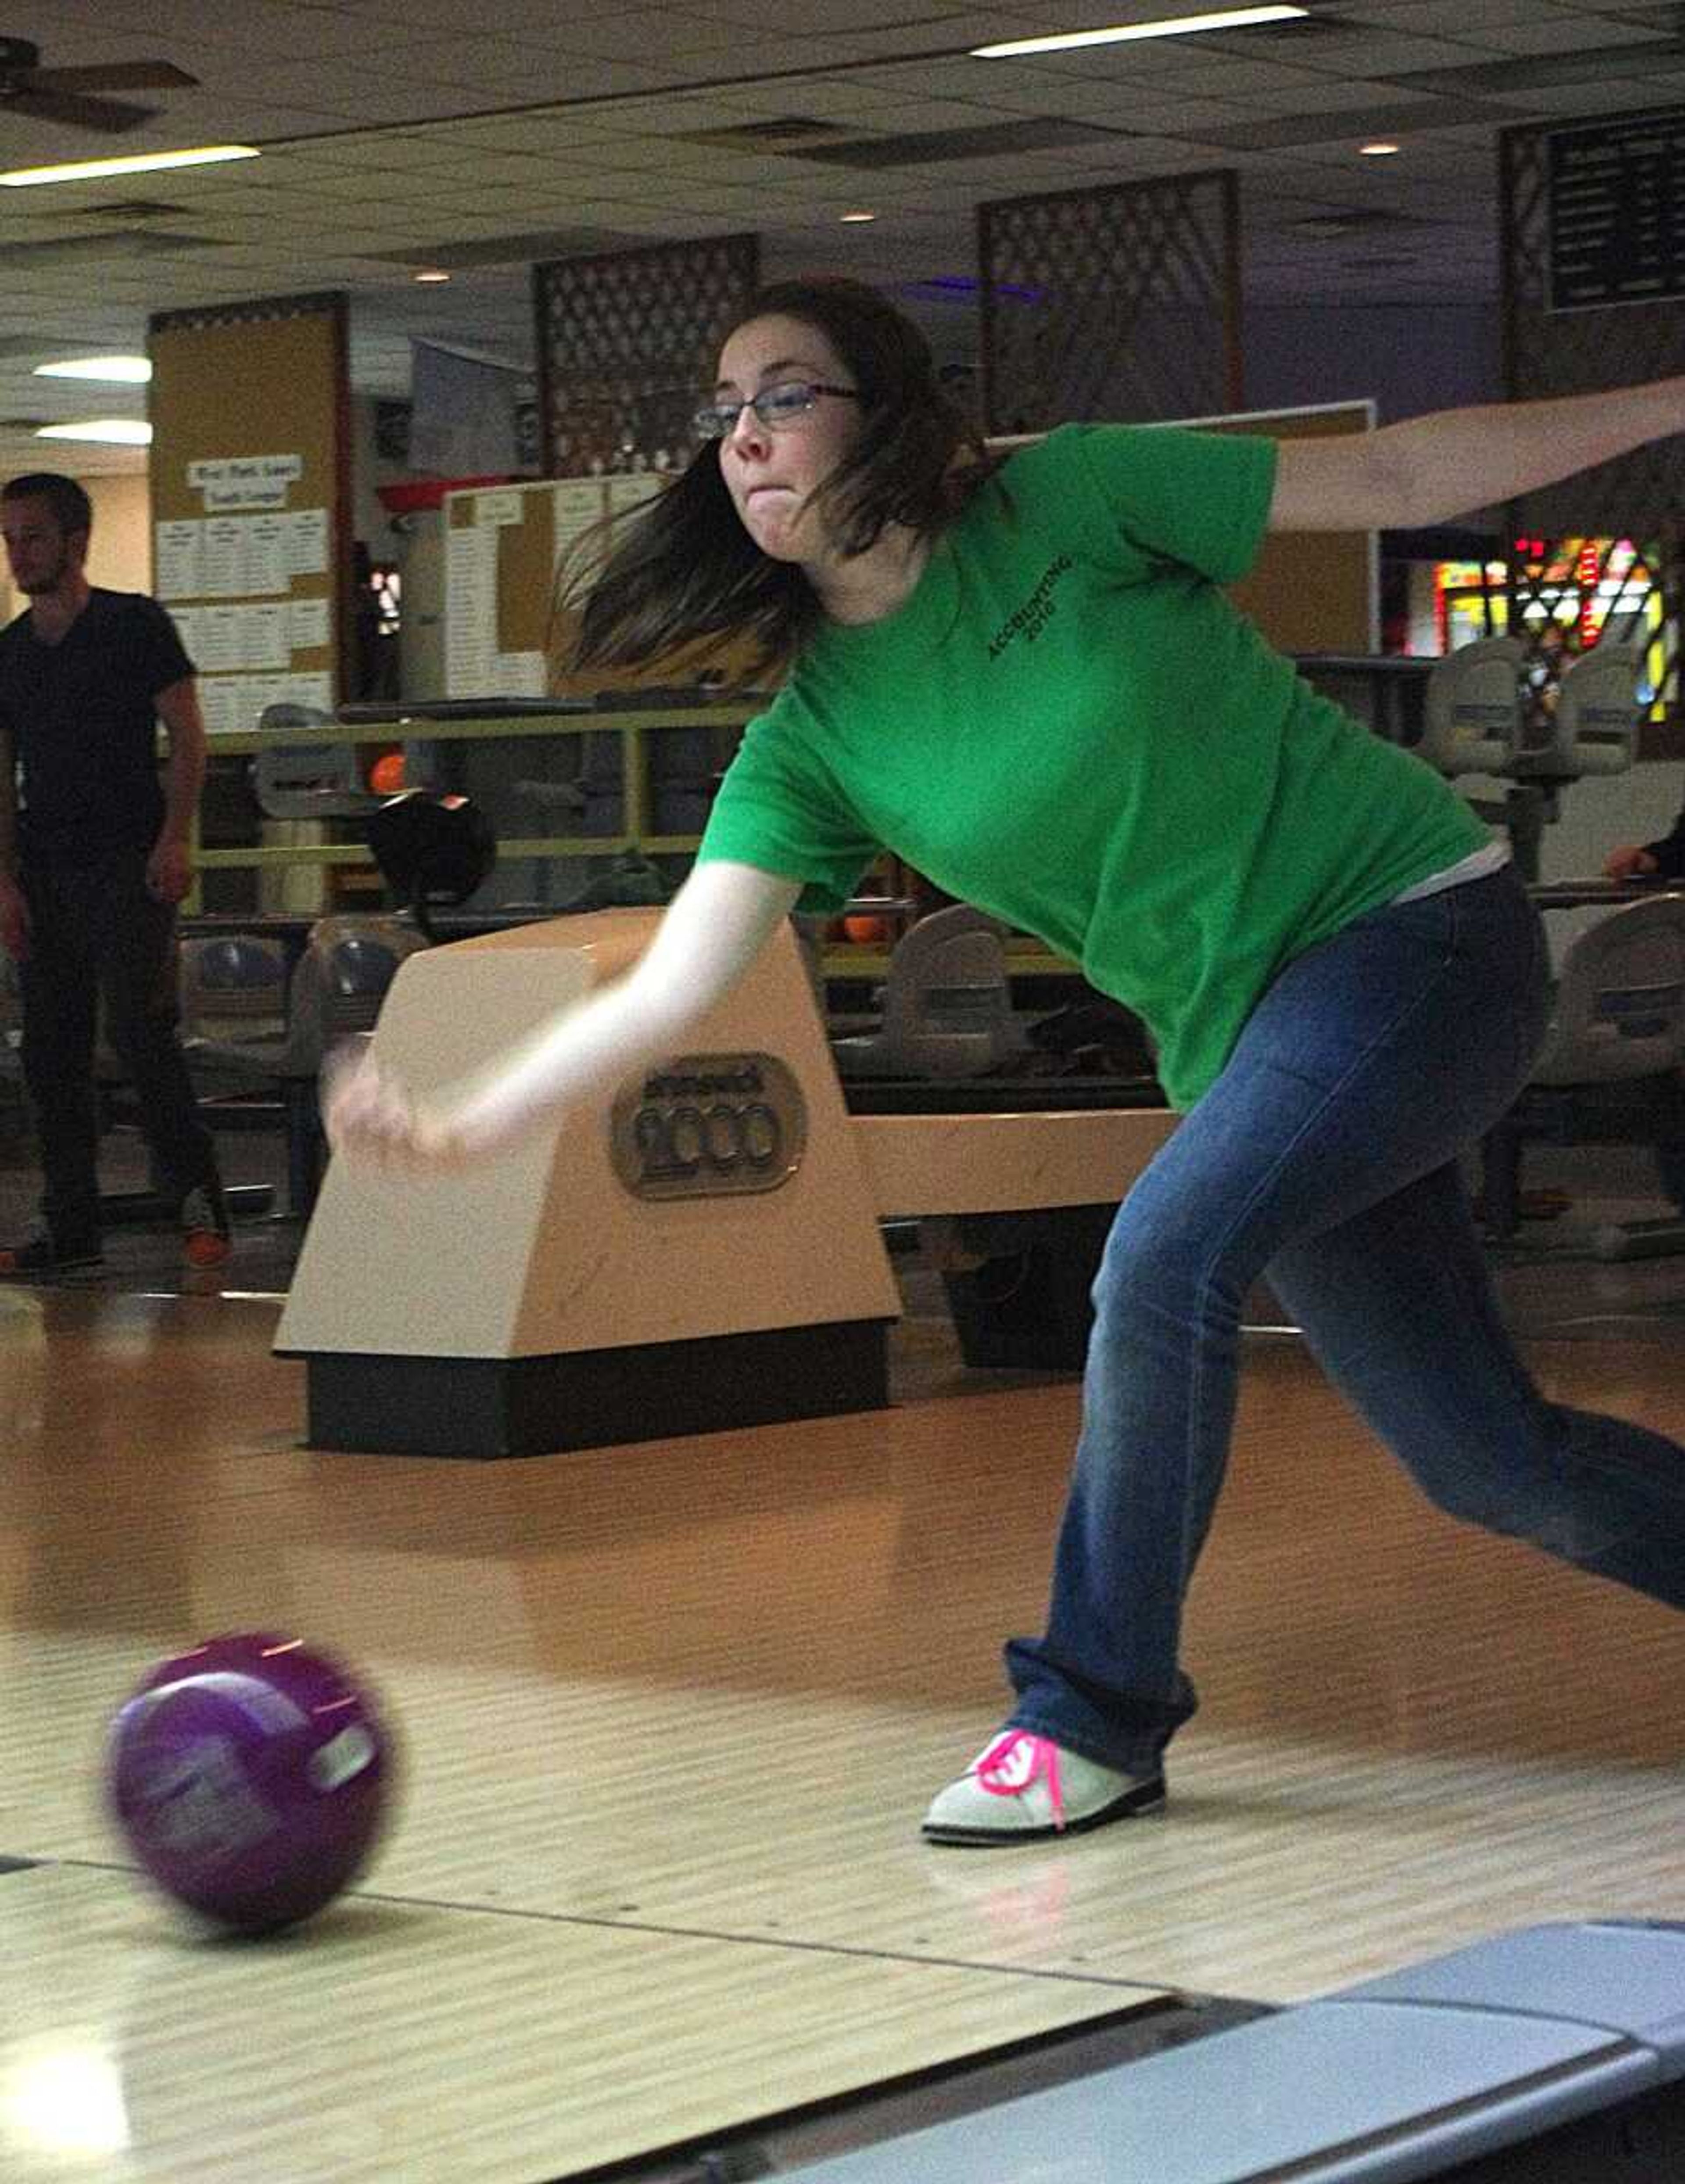 Students bowl in laid-back environment